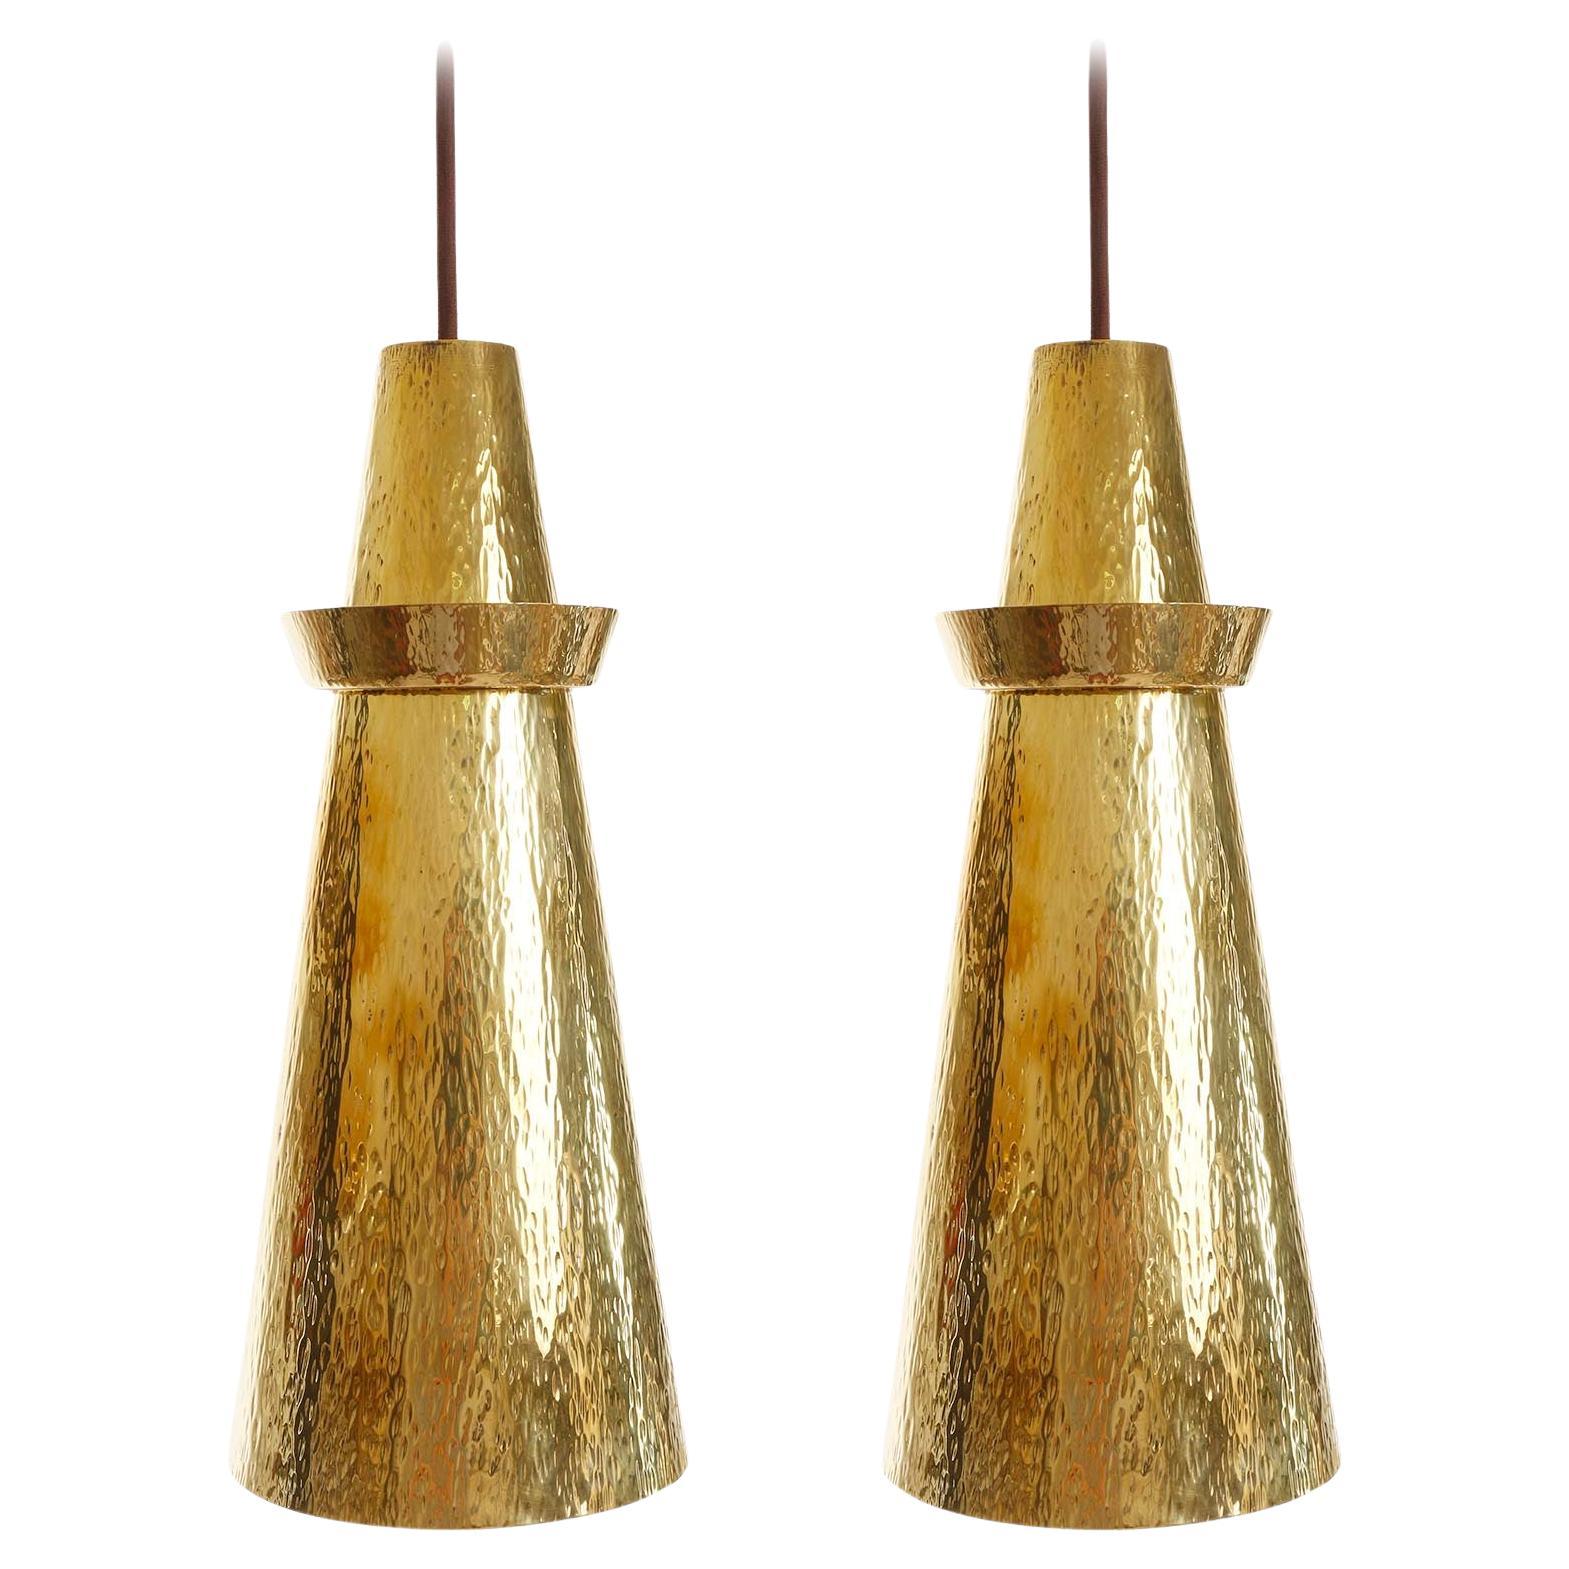 Pair of Mid-Century Modern Pendant Lights, Hammered Polished Brass, 1960s For Sale